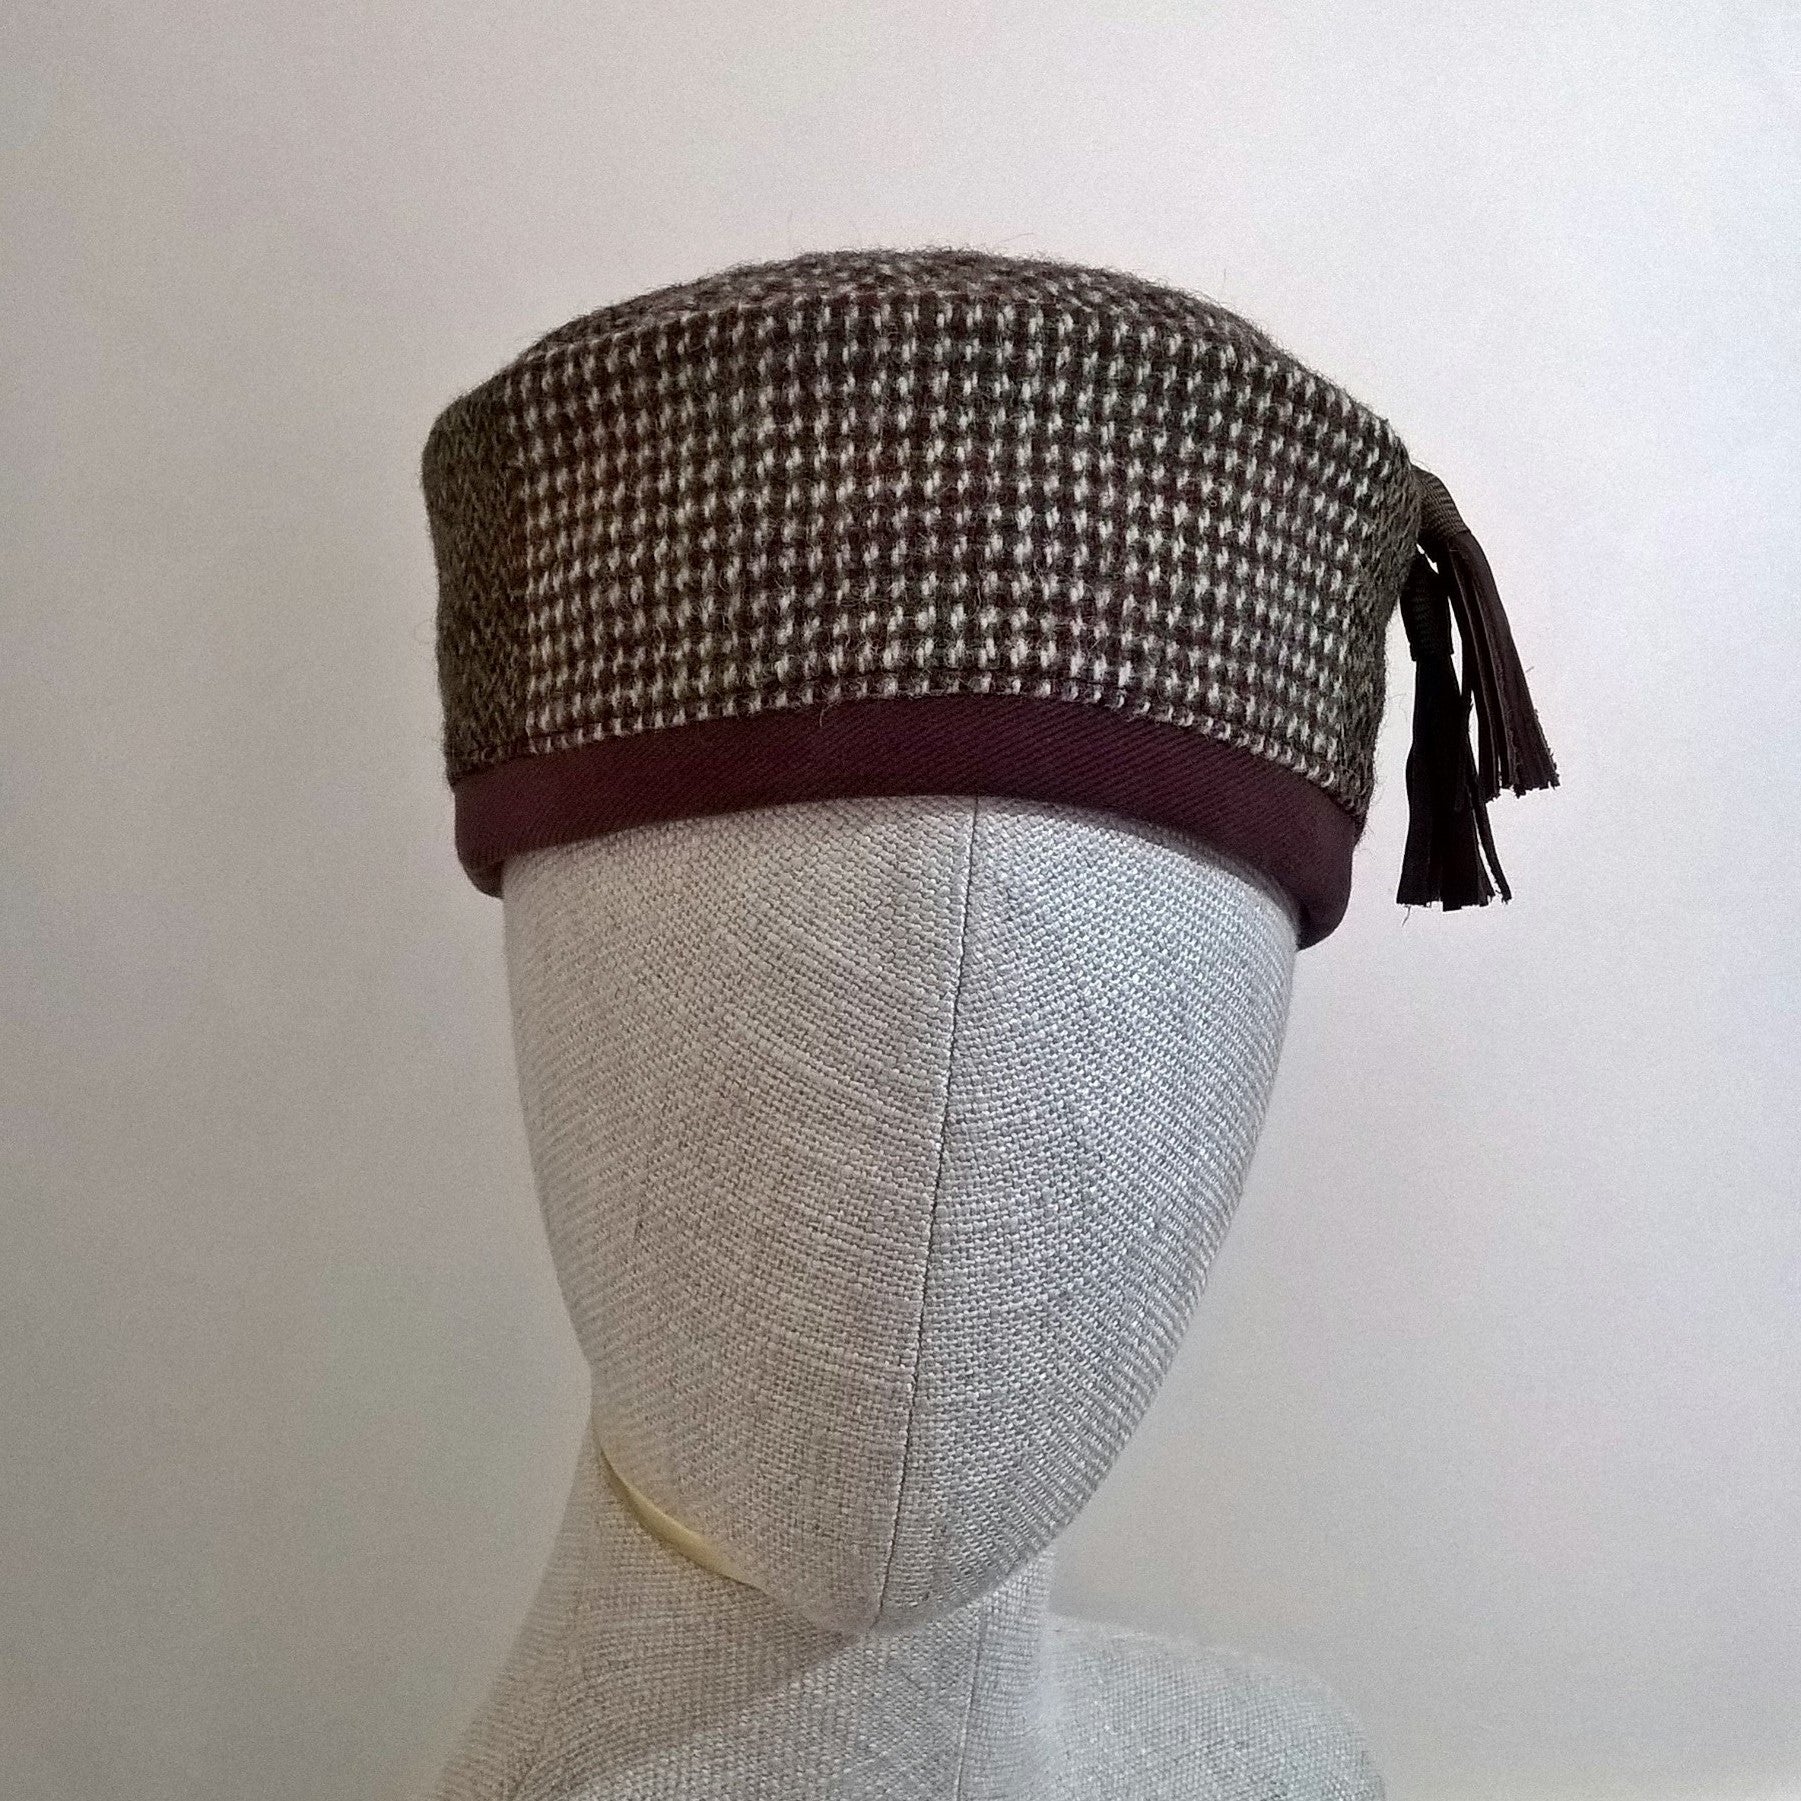 Harris Tweed wool smoking cap, in browns, cream and mauve shades, with macrame leather tassel